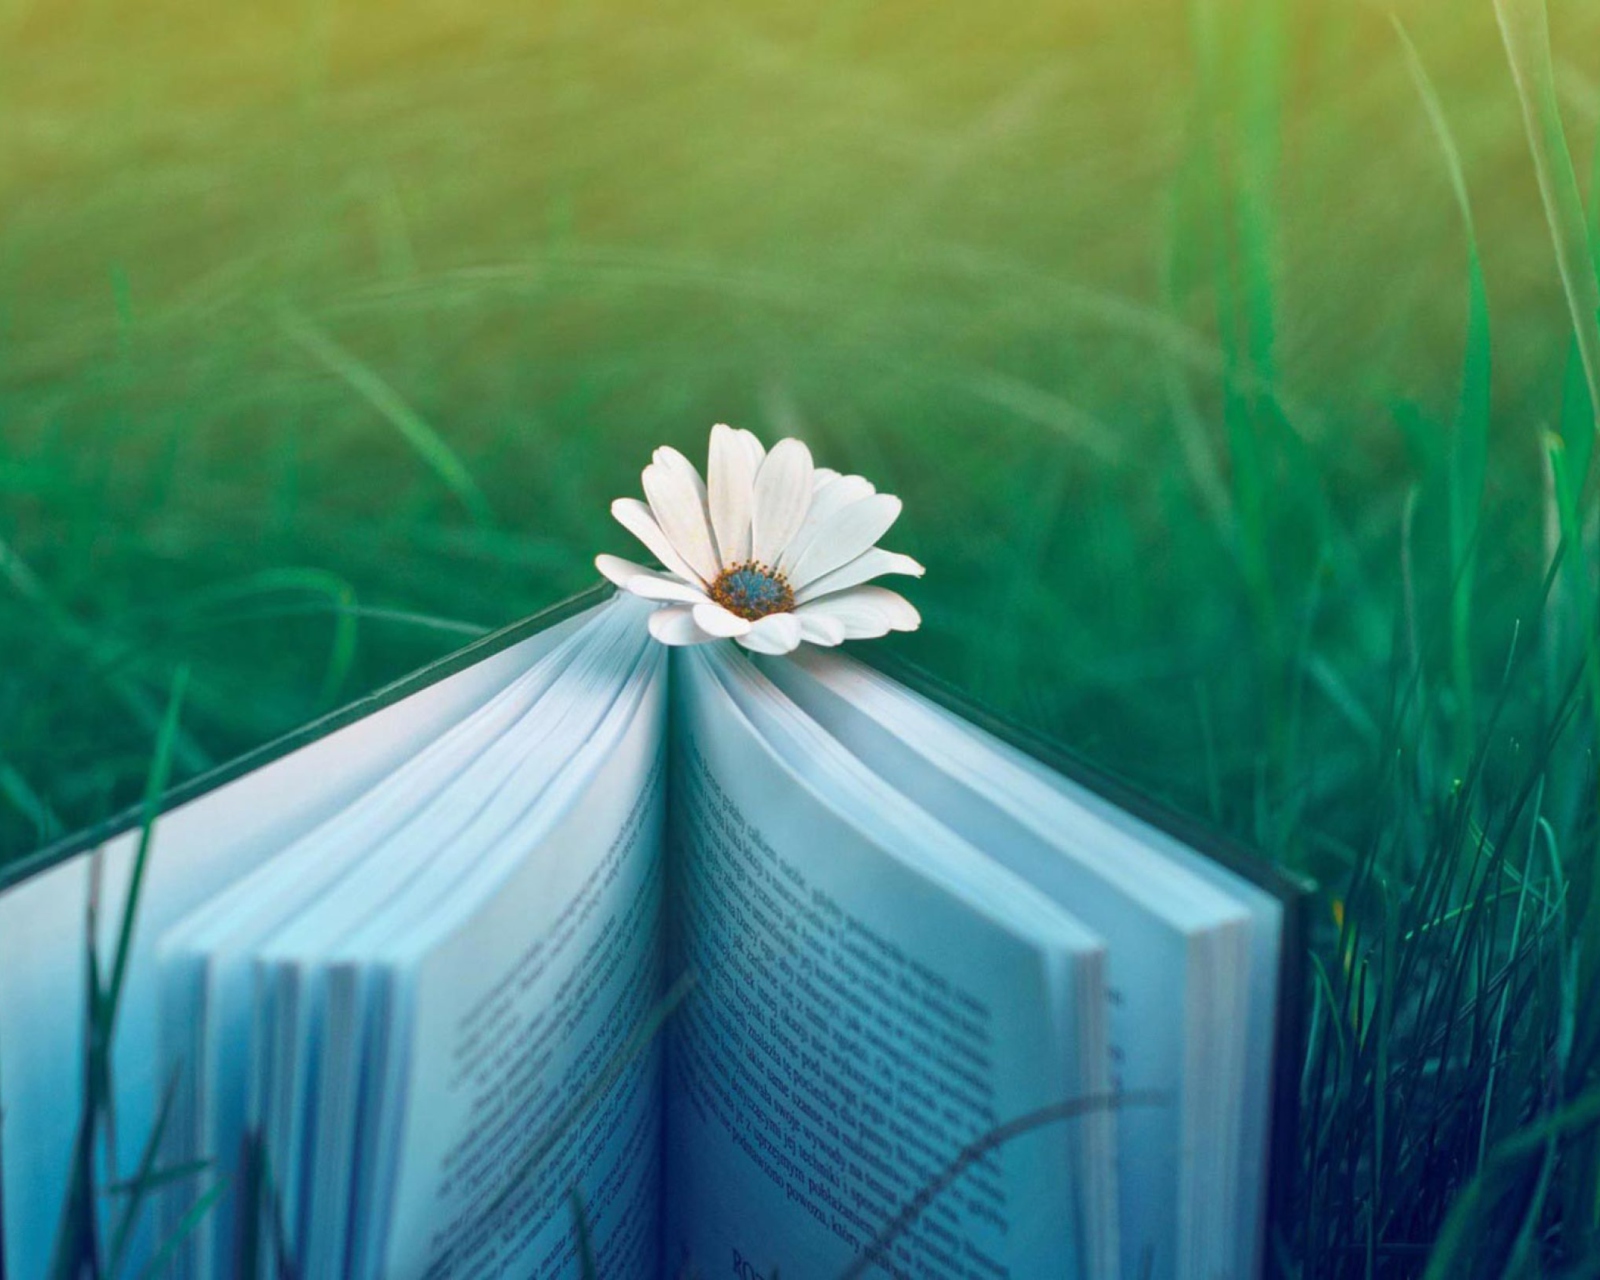 Flower And Book wallpaper 1600x1280